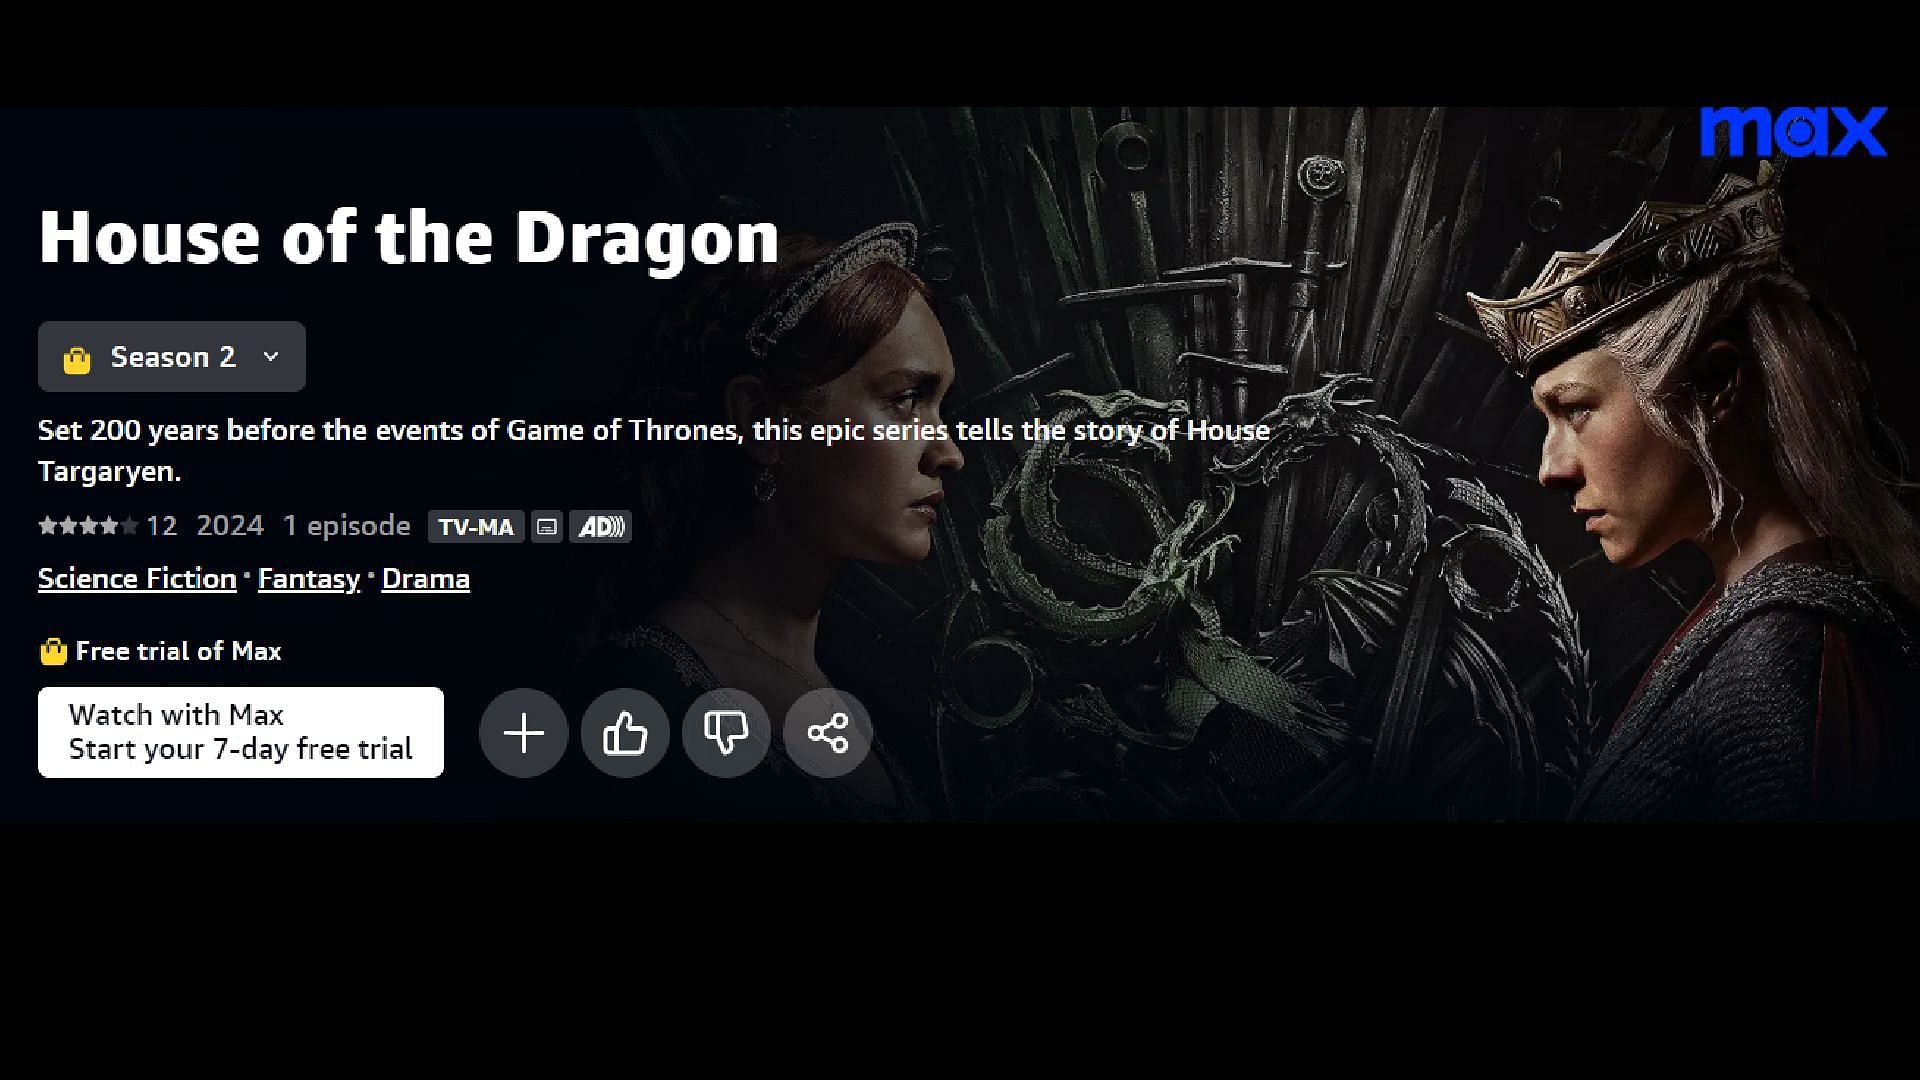 House of the Dragon season 2 episode 2 will be available for streaming on Amazon Prime Video via Max(Image via Amazon Prime Video)